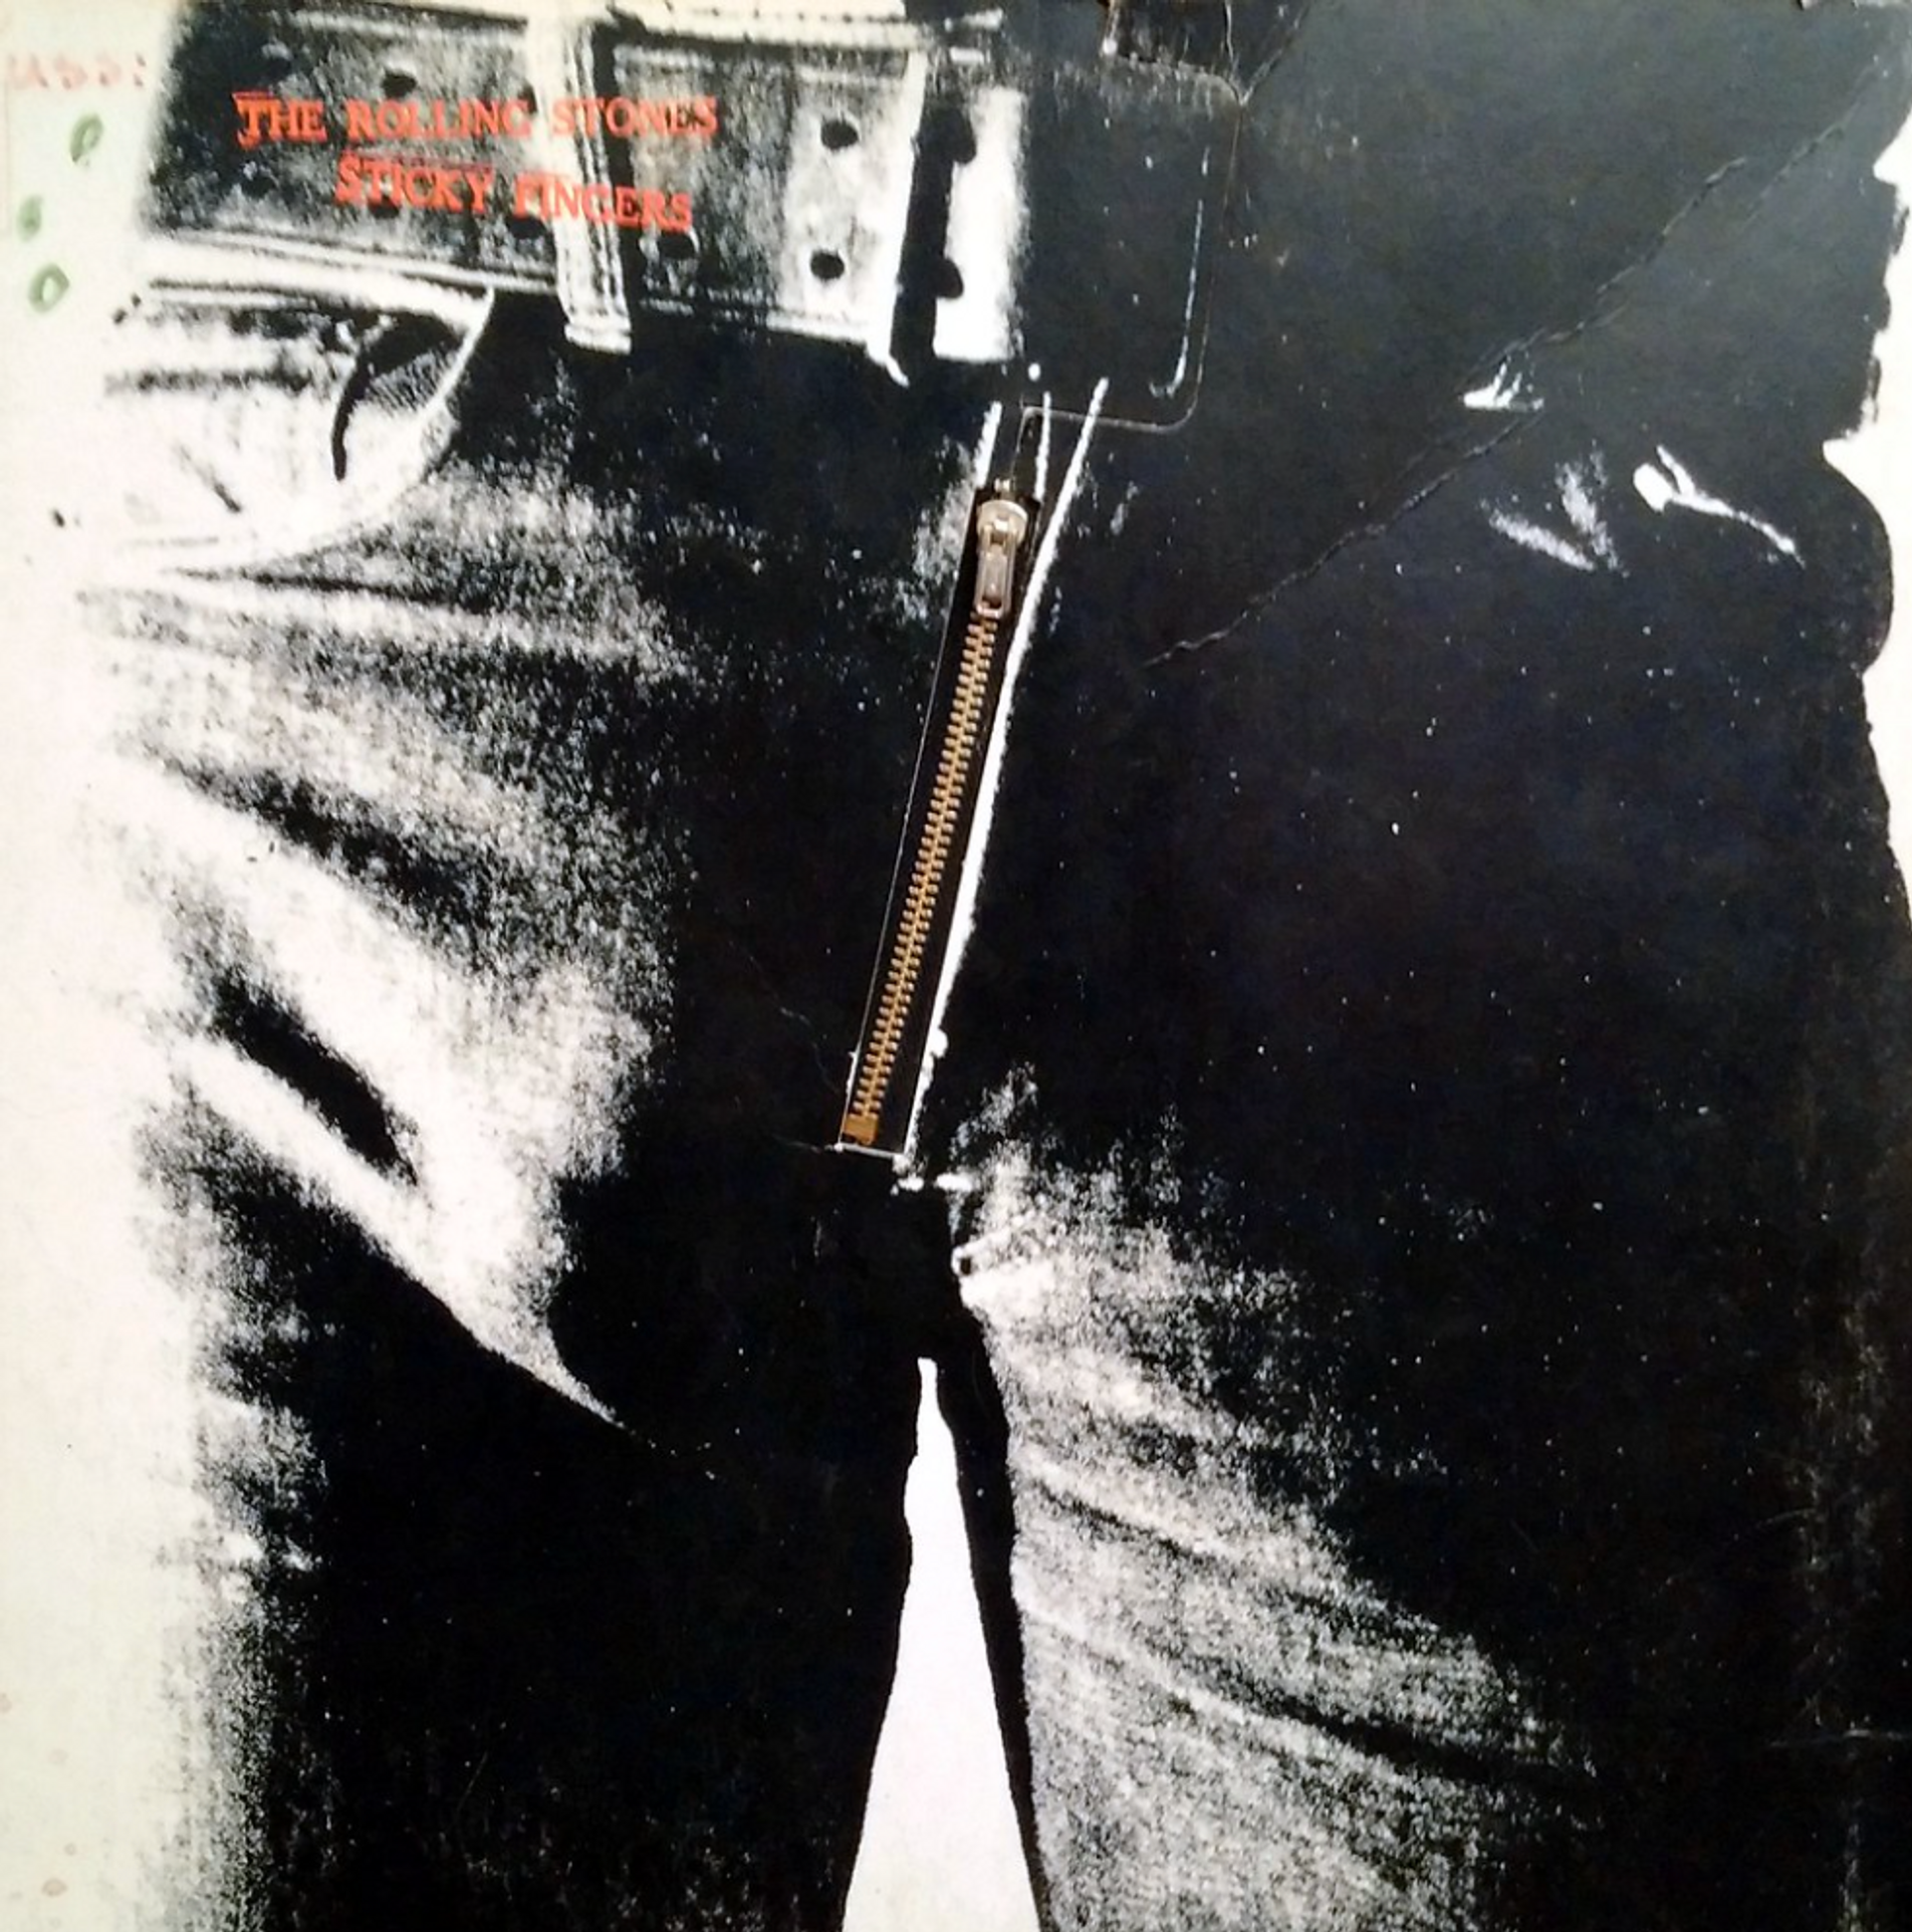 The Rolling Stones' "Sticky Fingers" Album Cover by Andy Warhol